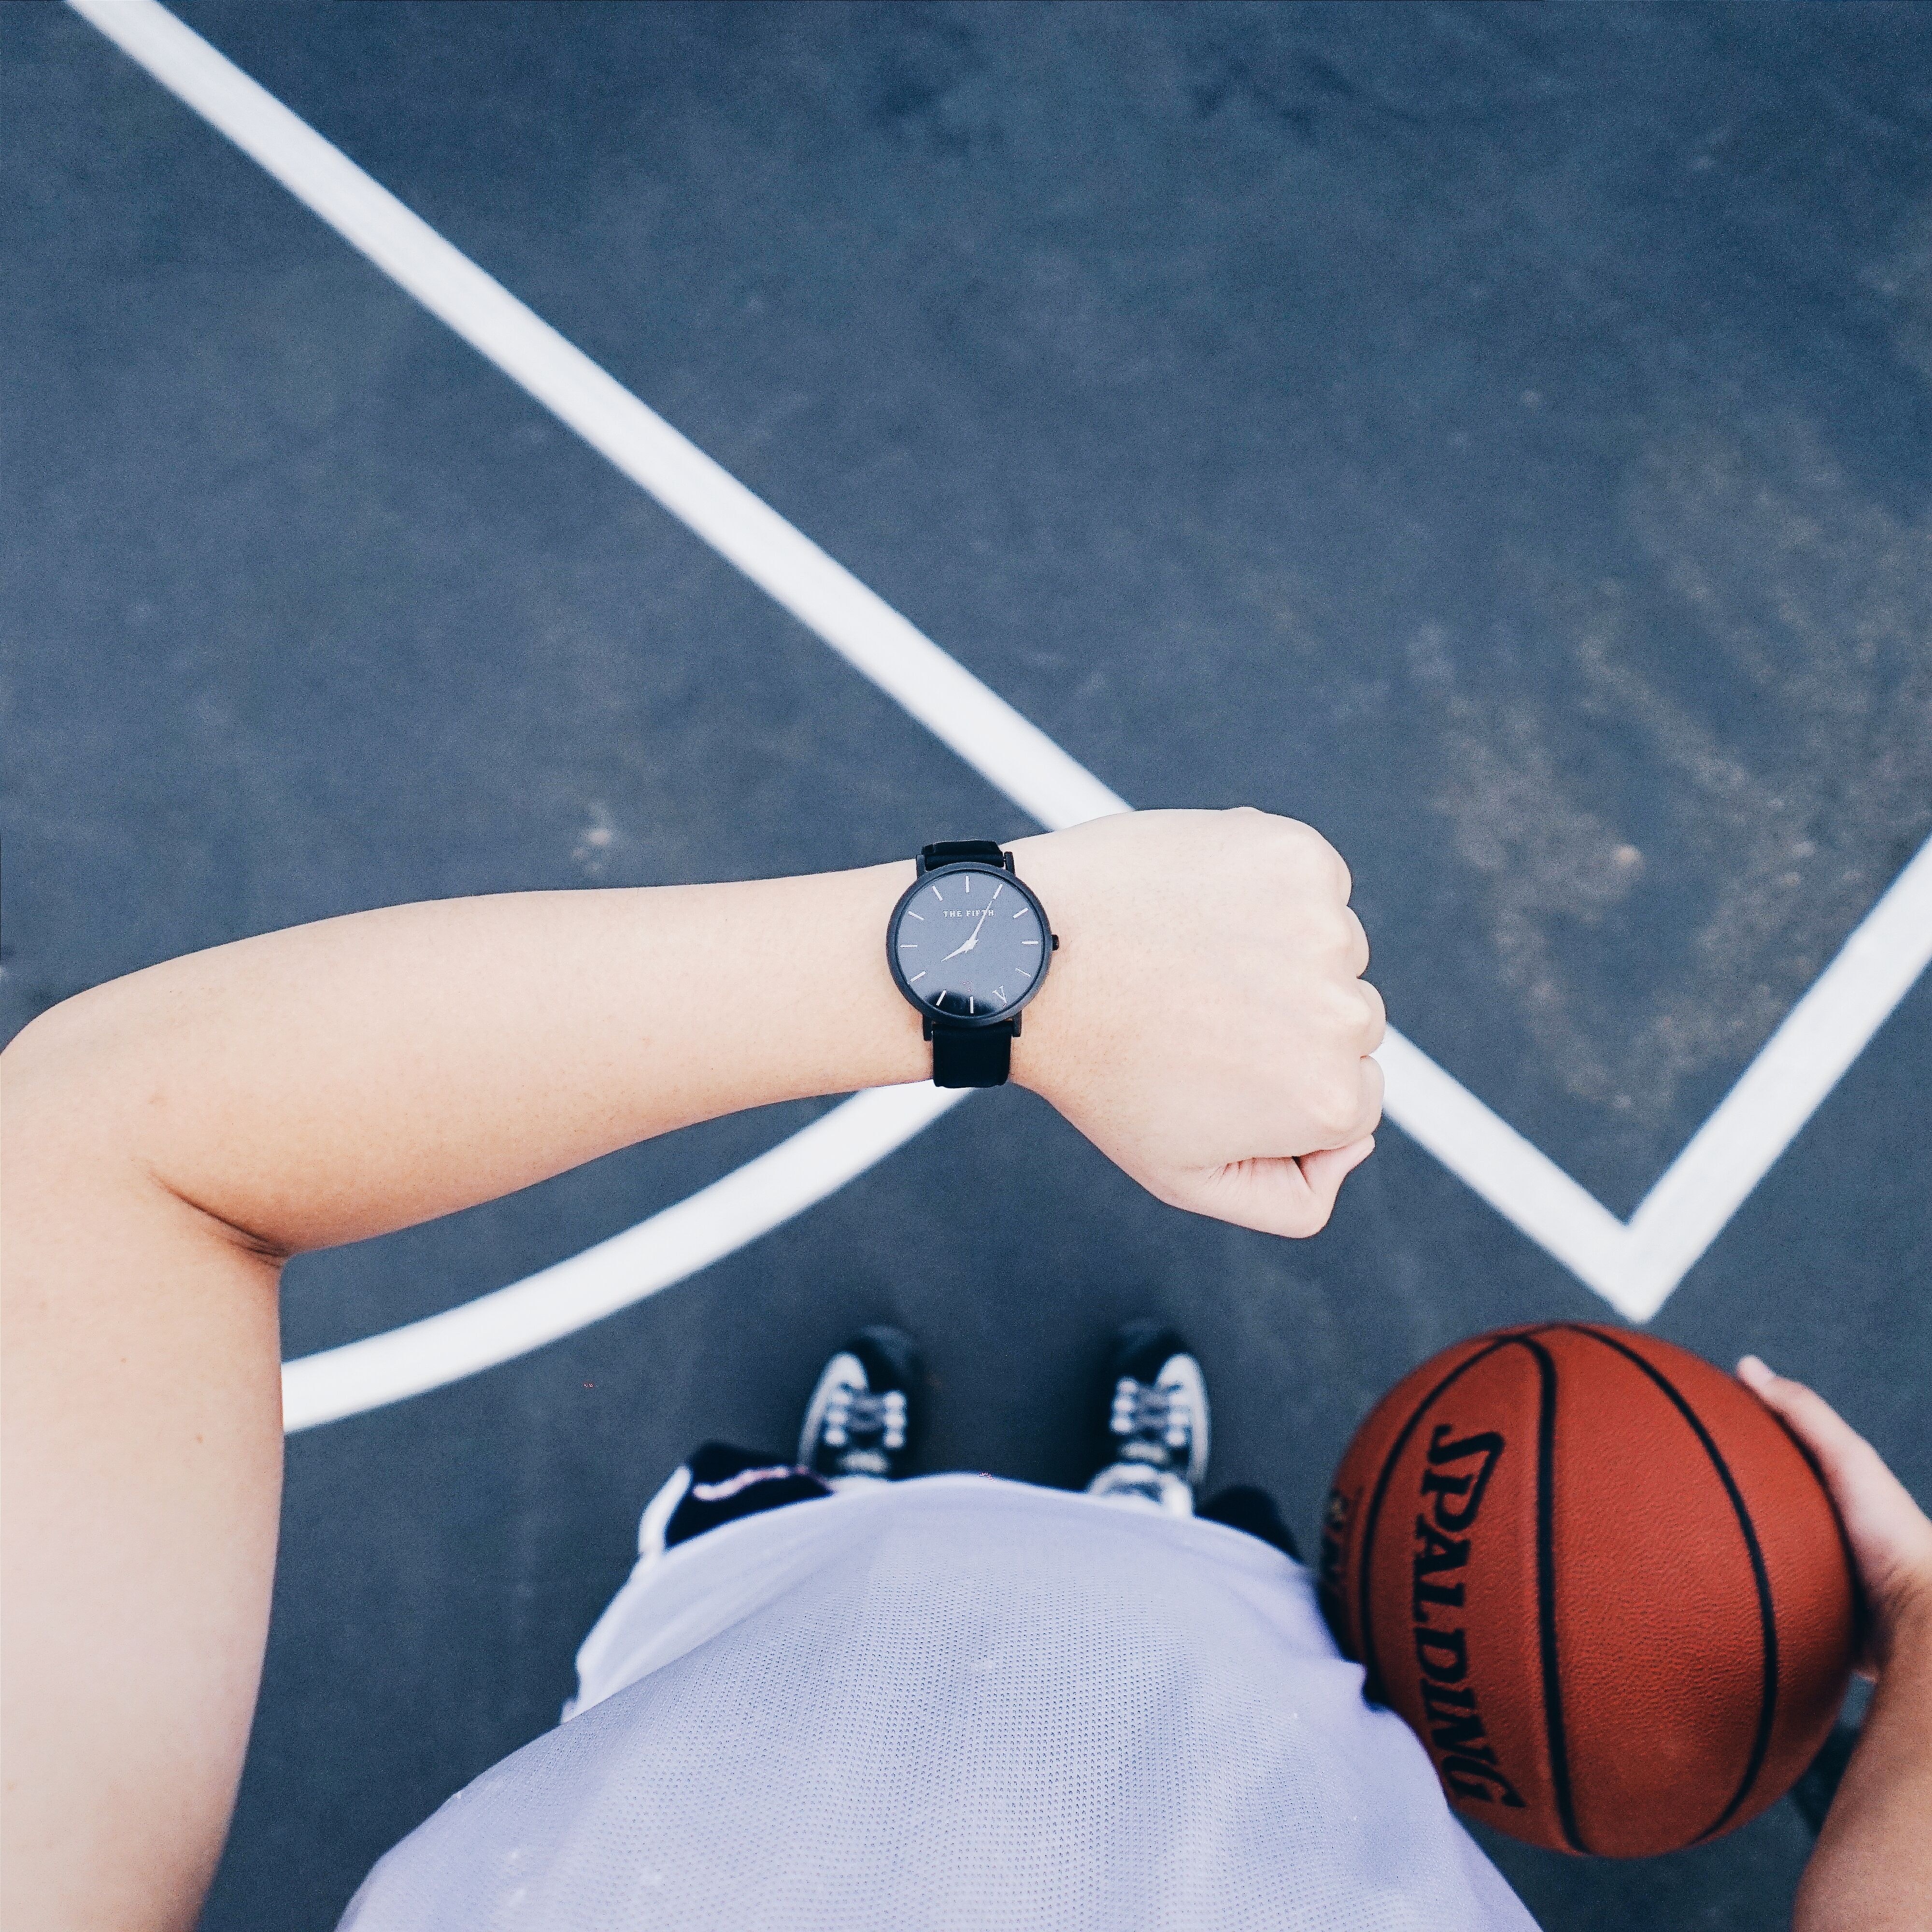 Person wearing black round analog watch on left wrist while holding basketball on right hand photo